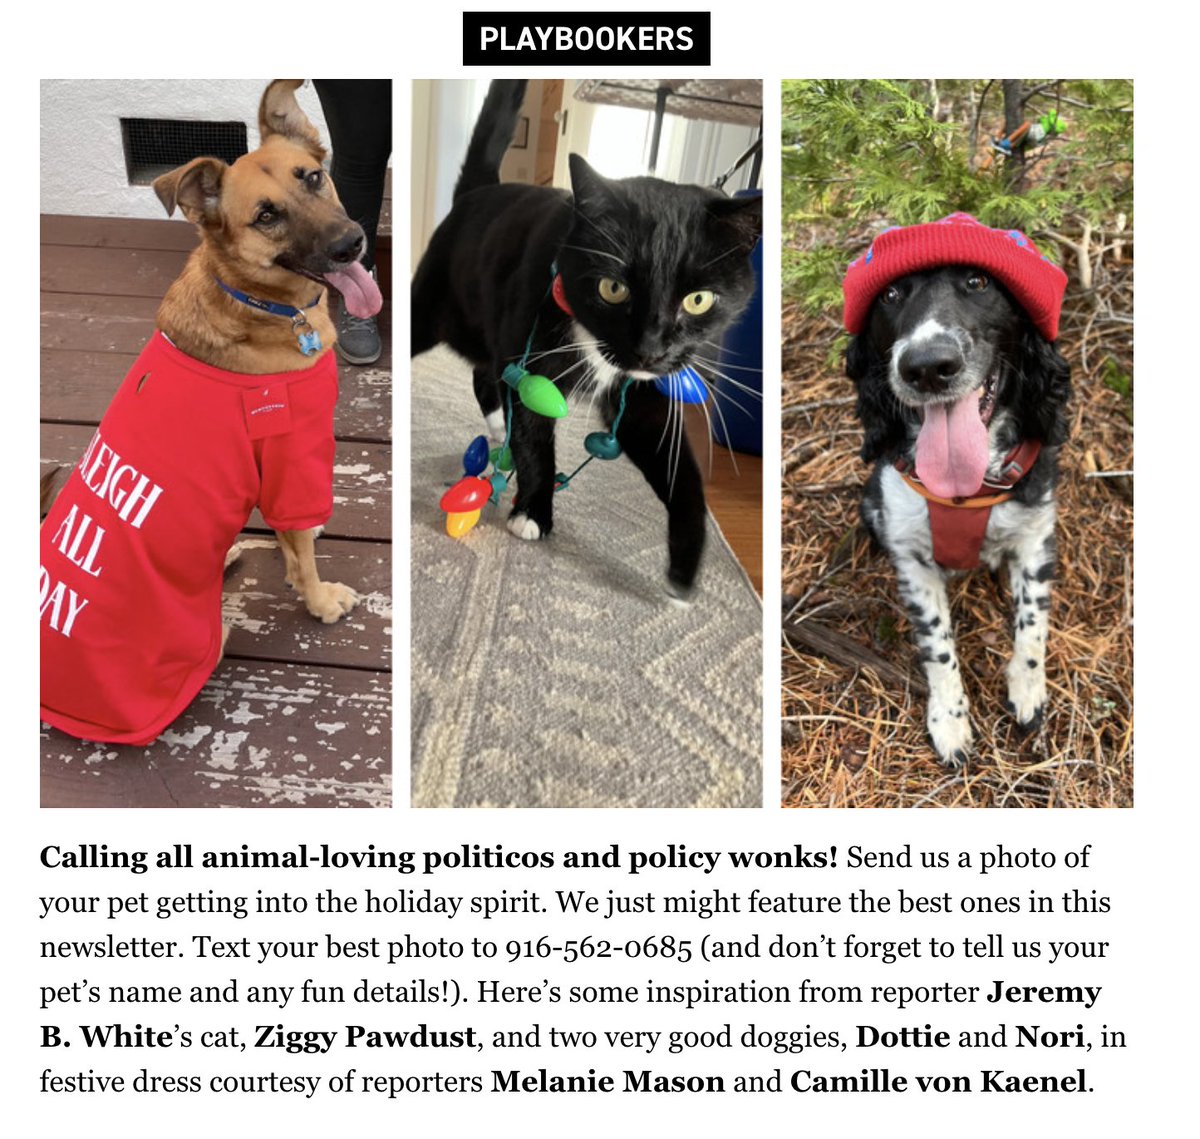 This job has always just been a long-term ploy to get you to send me pet photos. Text us a photo of your furry friend in a festive getup for a chance to be featured in CA Playbook — 916-562-0685. #caleg